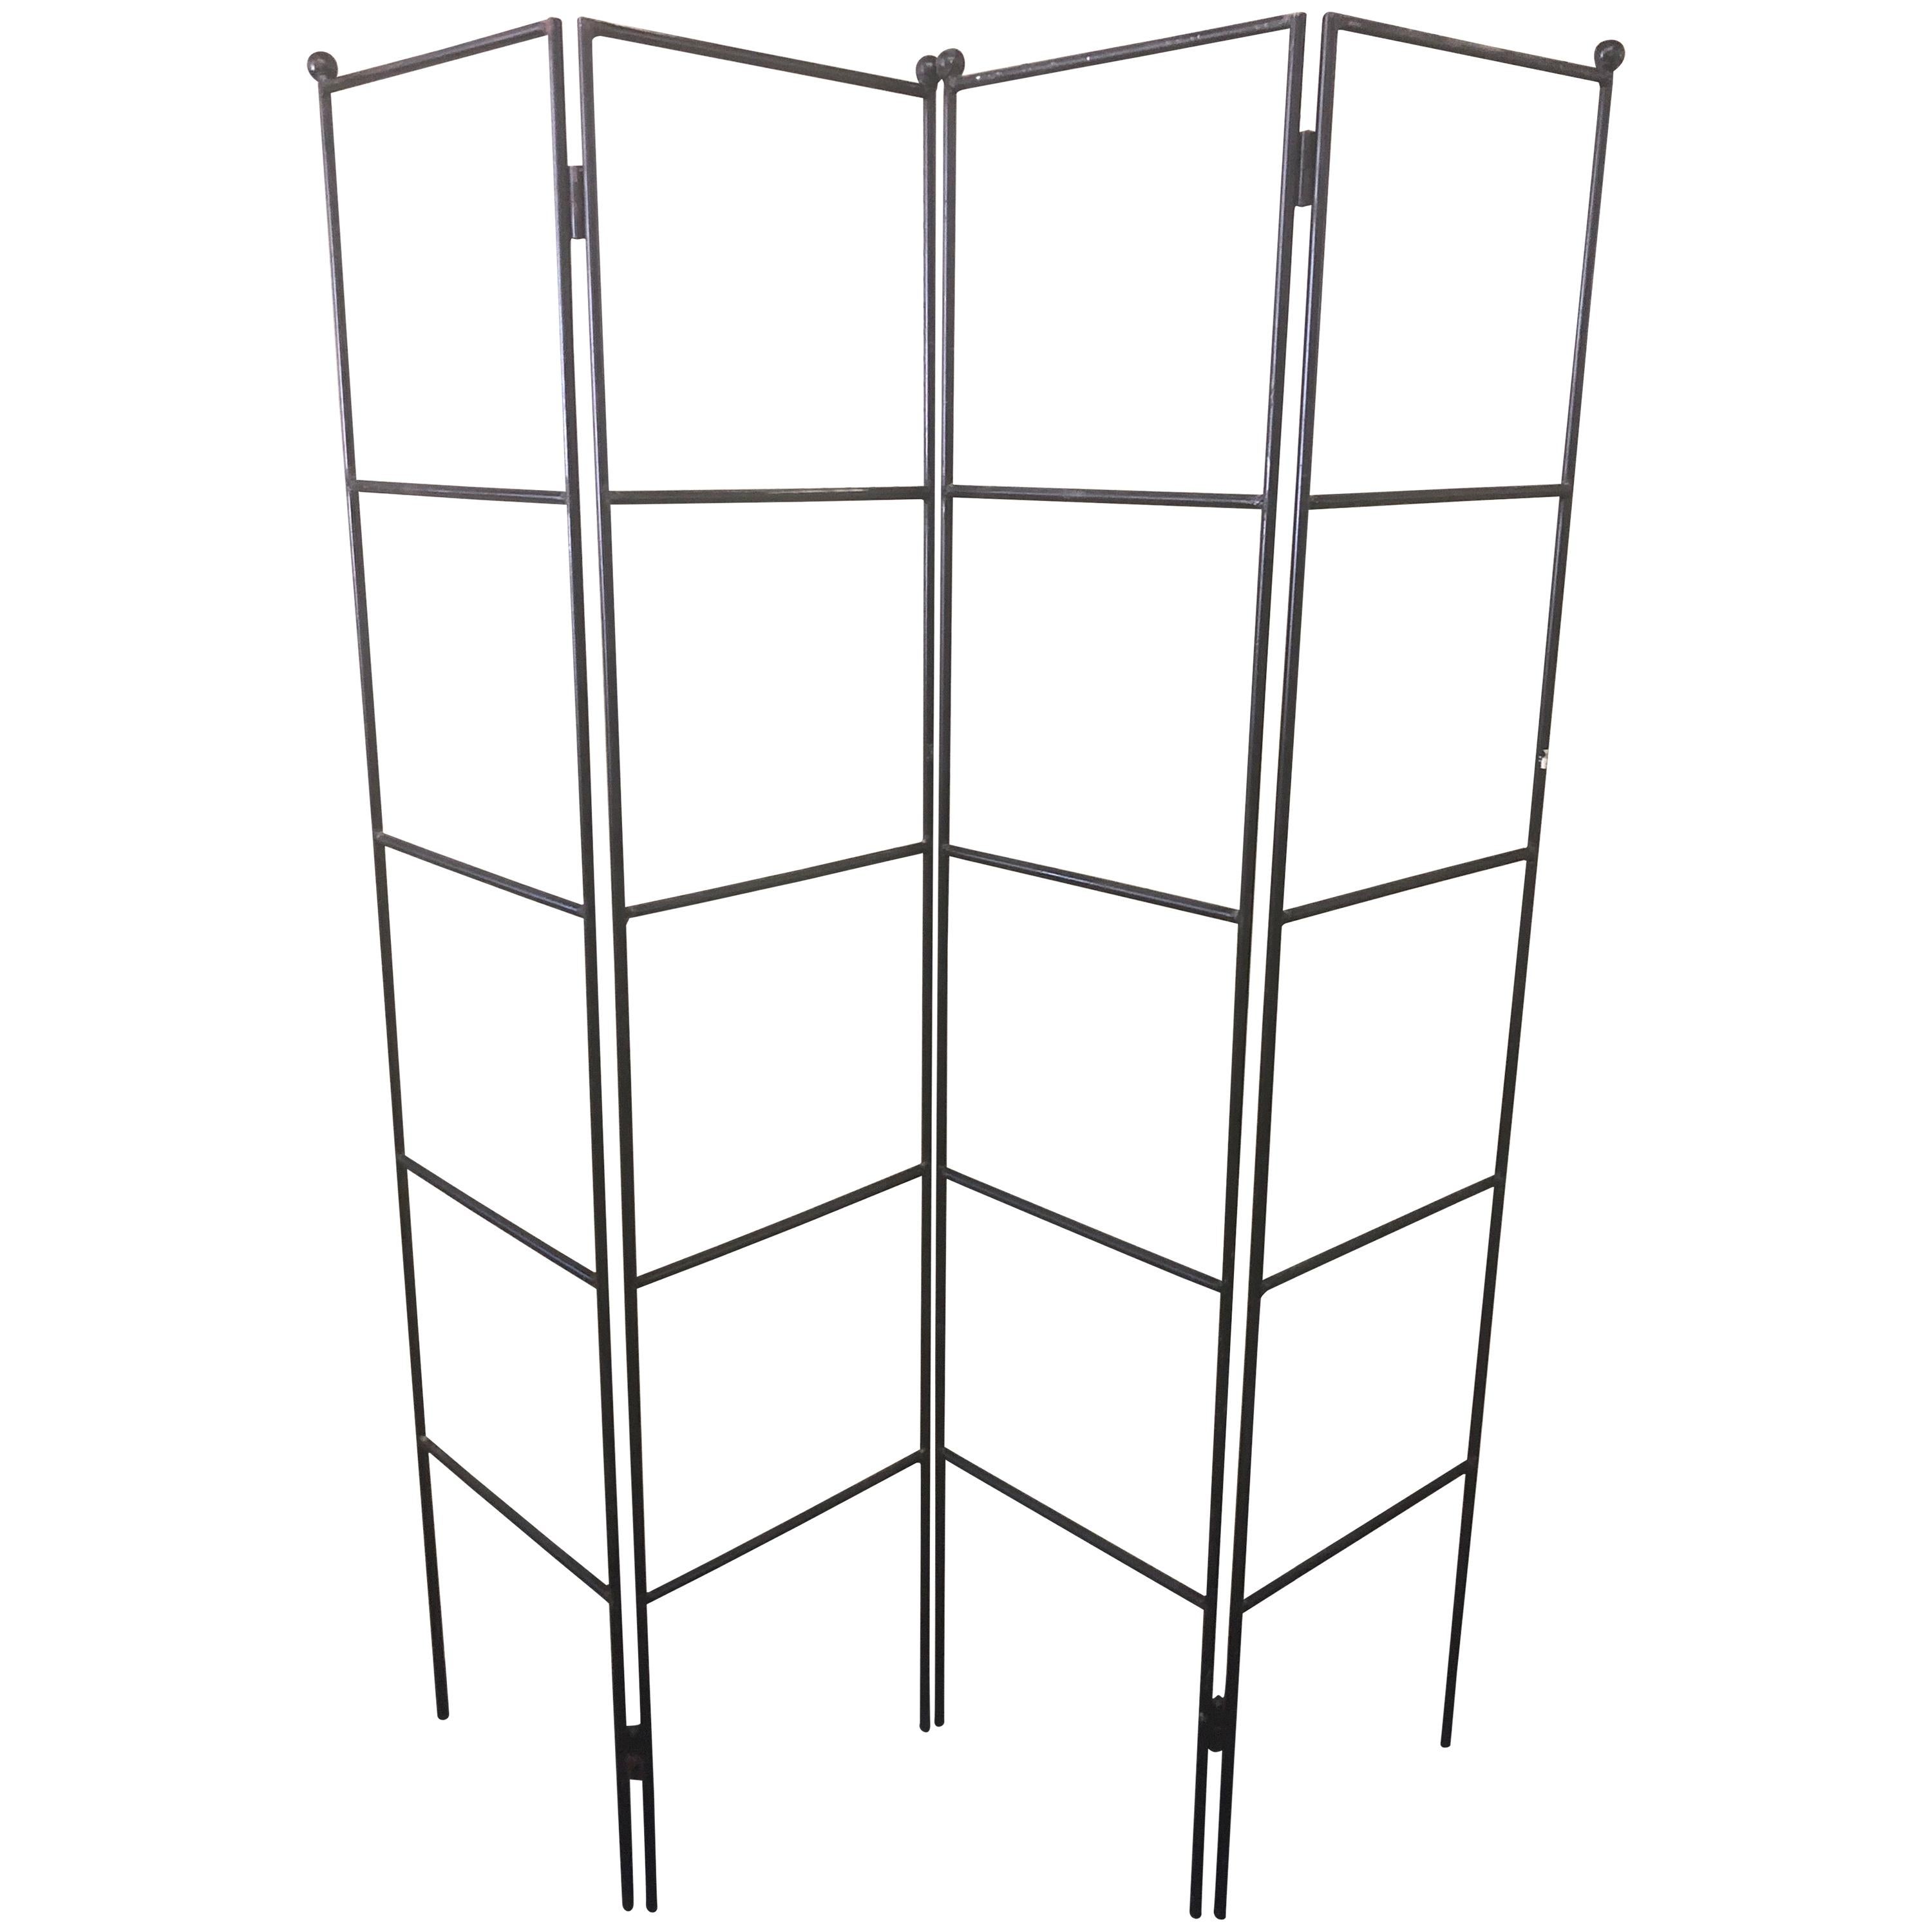 Minimalist Four-Panel Wrought Iron Room Divider / Screen